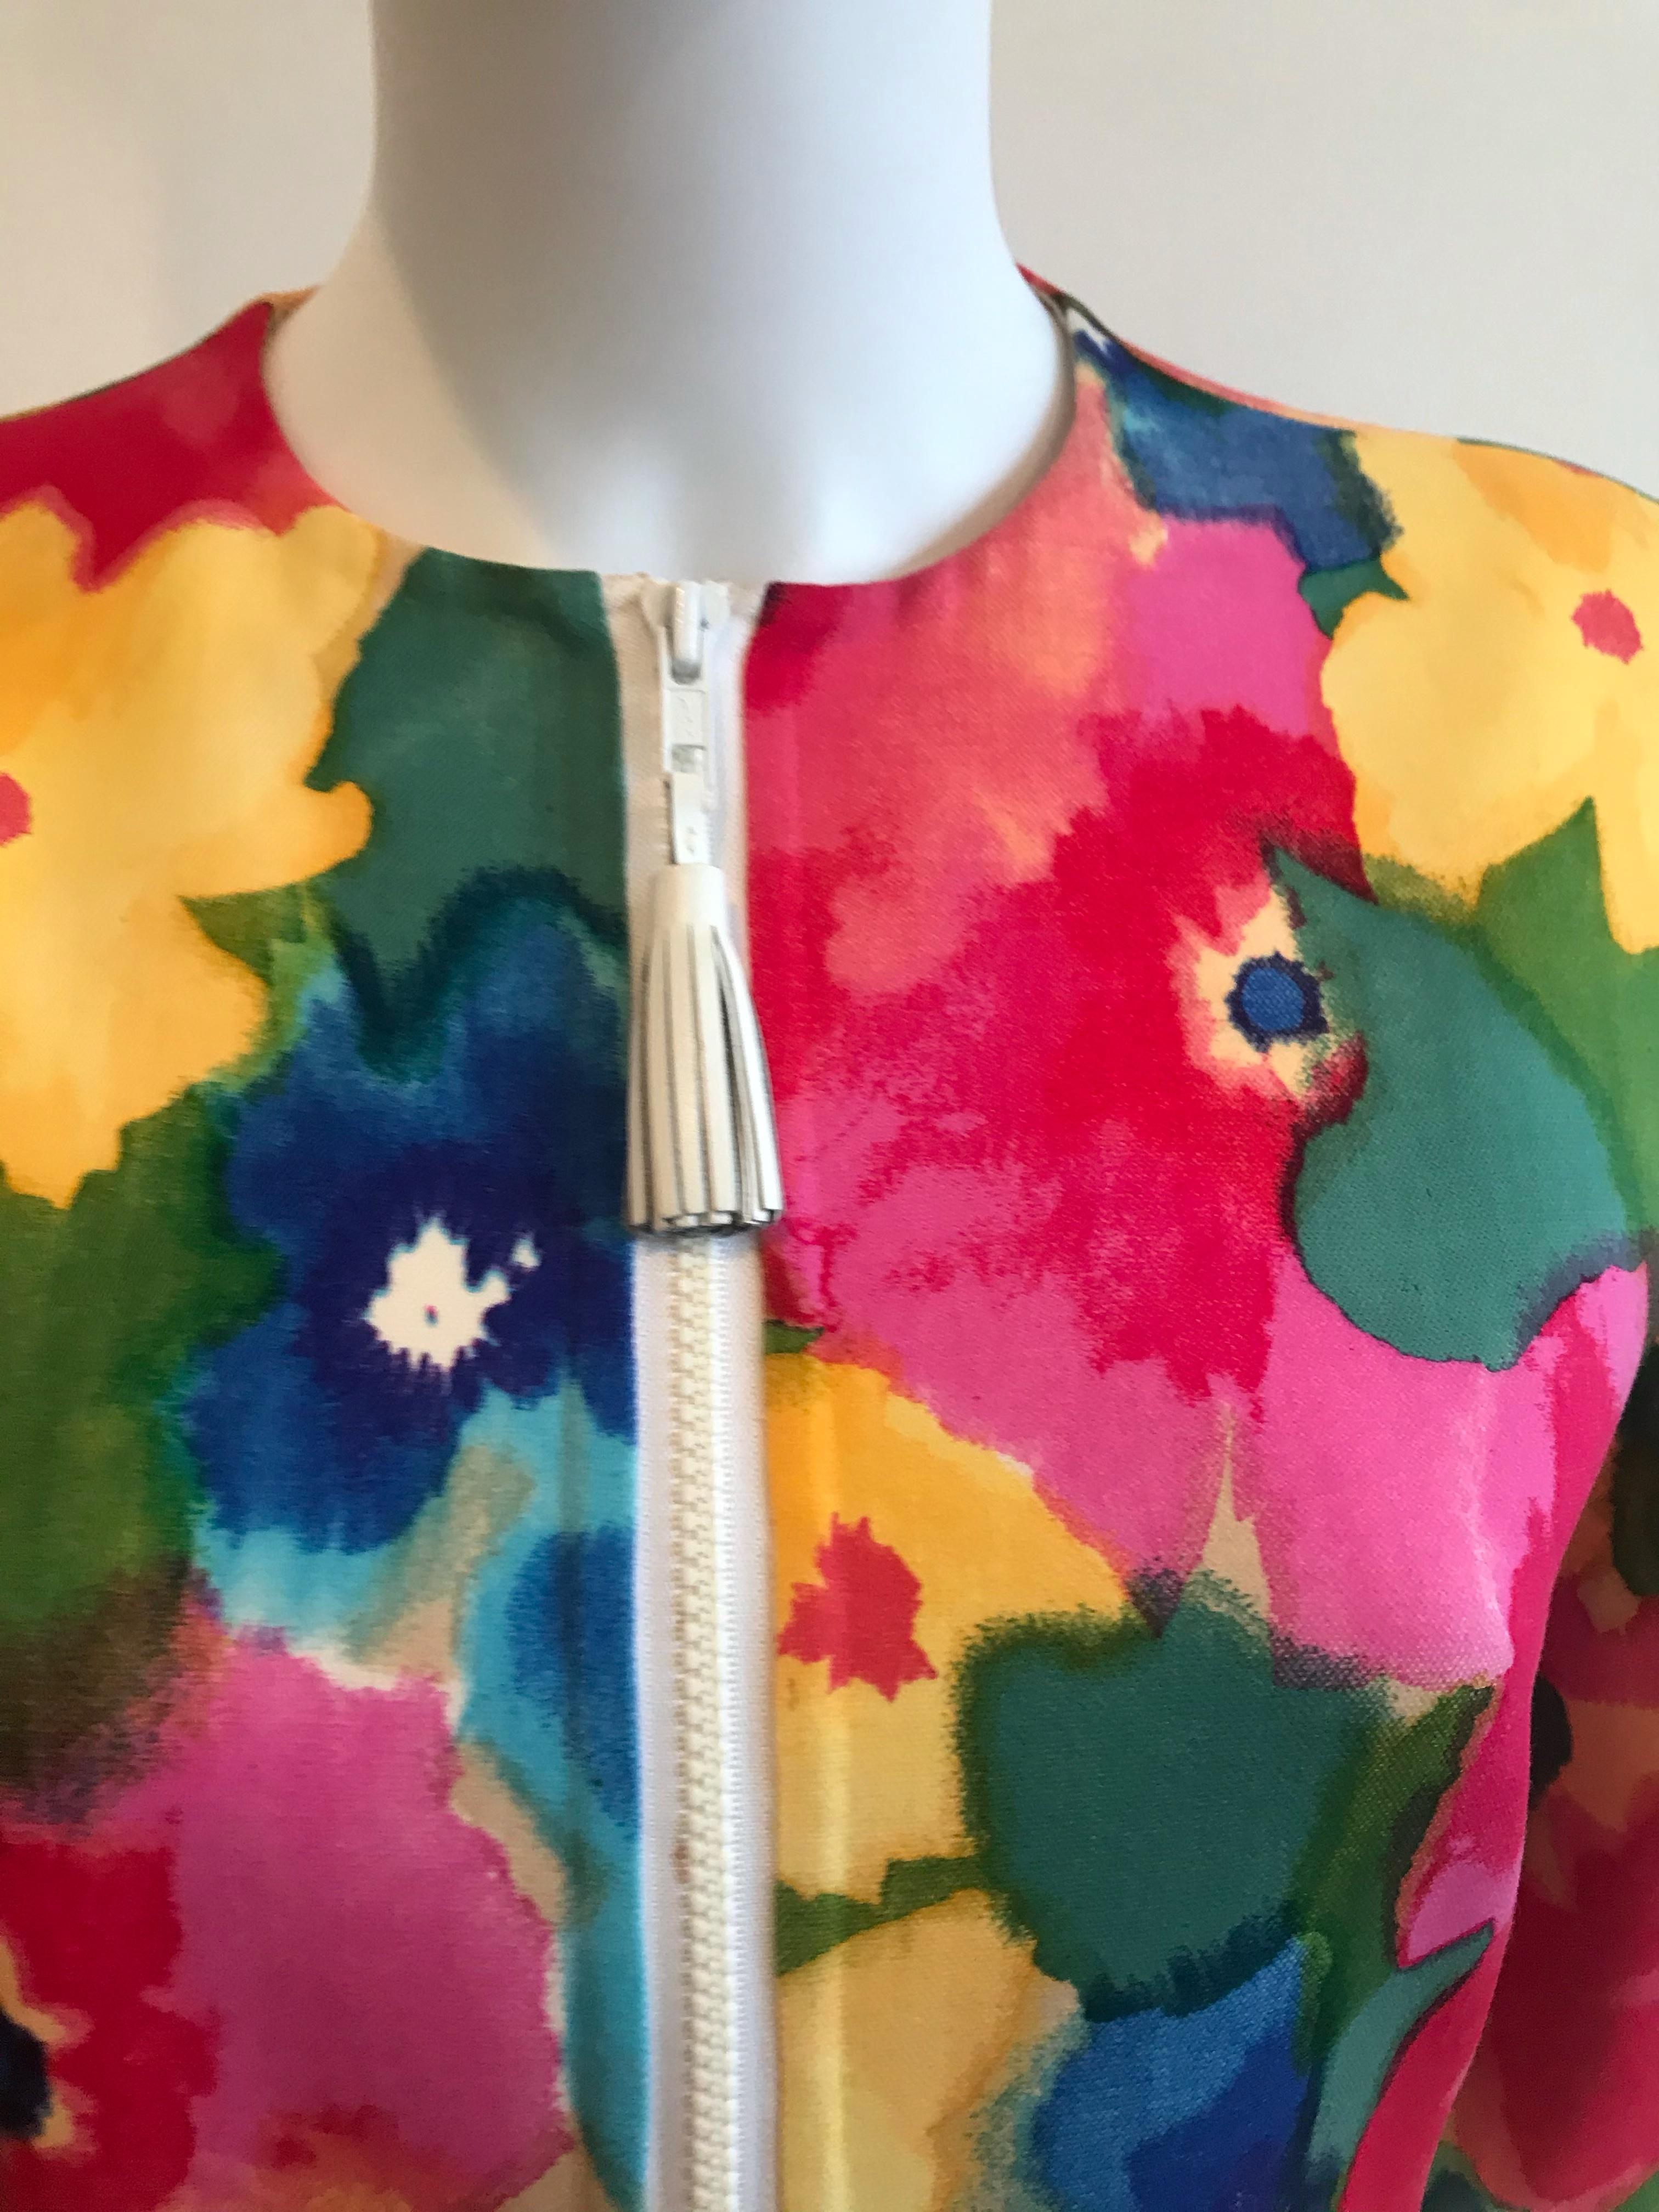 Bill Blass Watercolor Floral Jacket With Leather Tassel Detailing In Good Condition For Sale In Brooklyn, NY